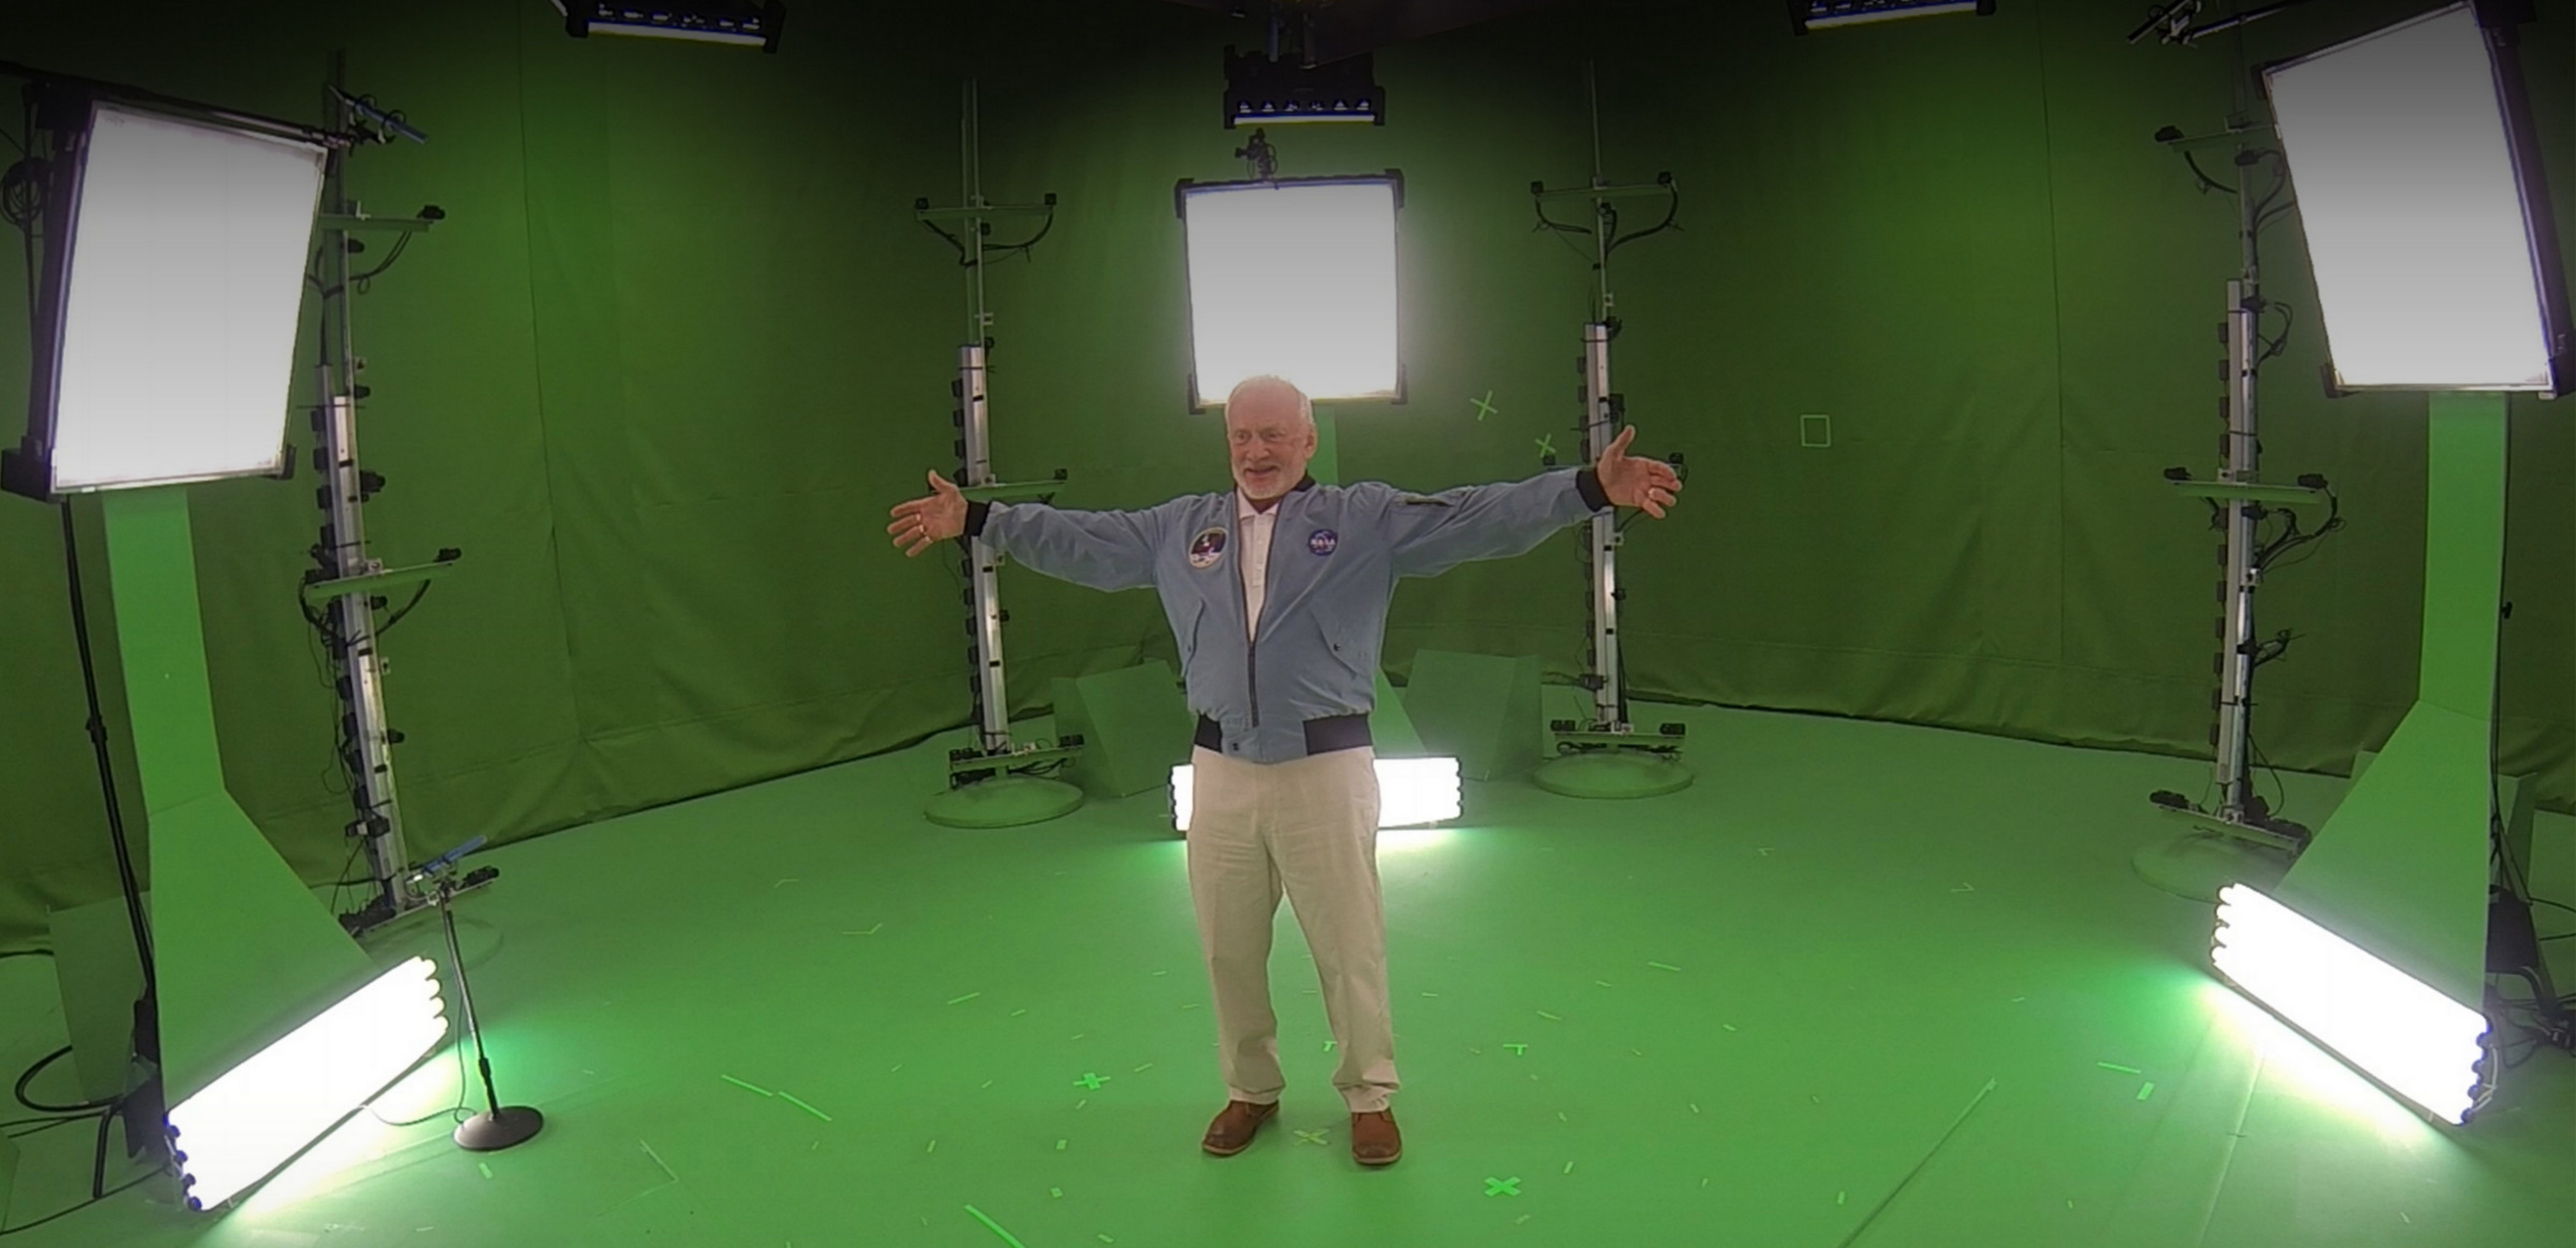 Buzz Aldrin standing in the Mixed Reality Capture Studio.